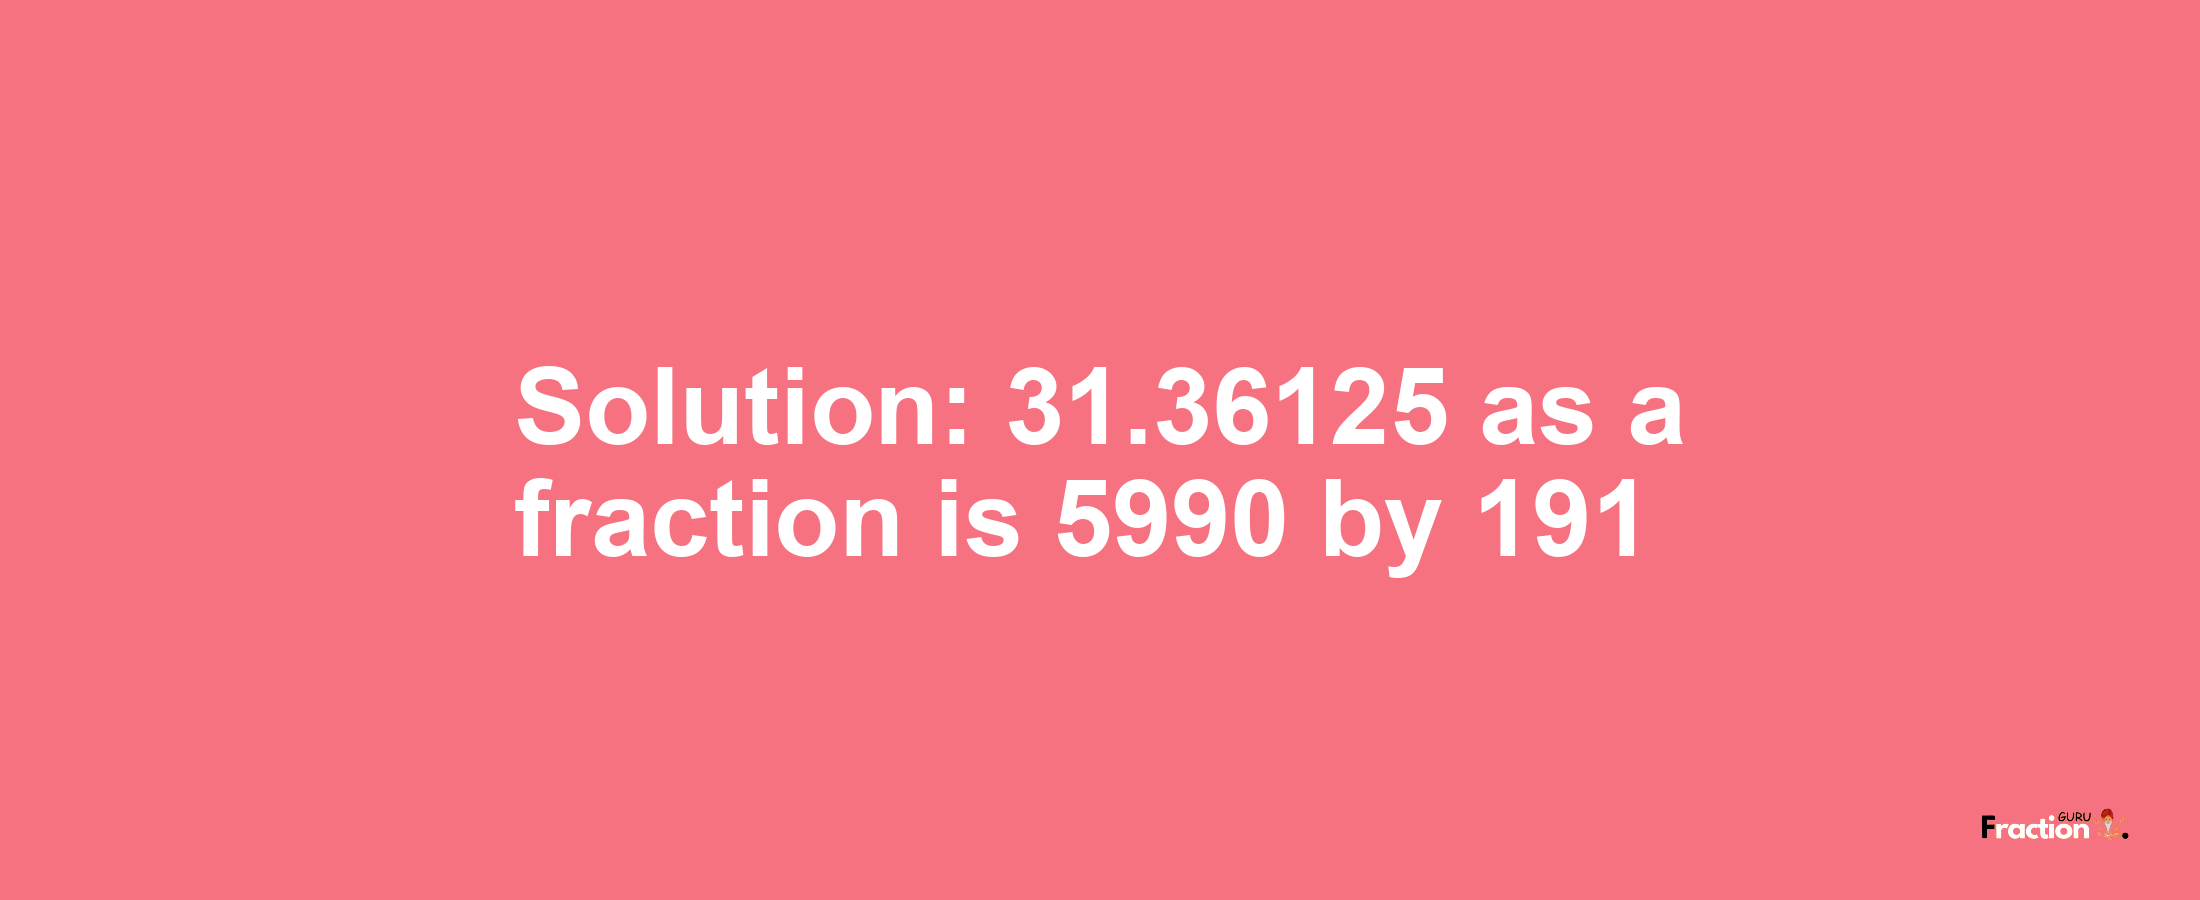 Solution:31.36125 as a fraction is 5990/191